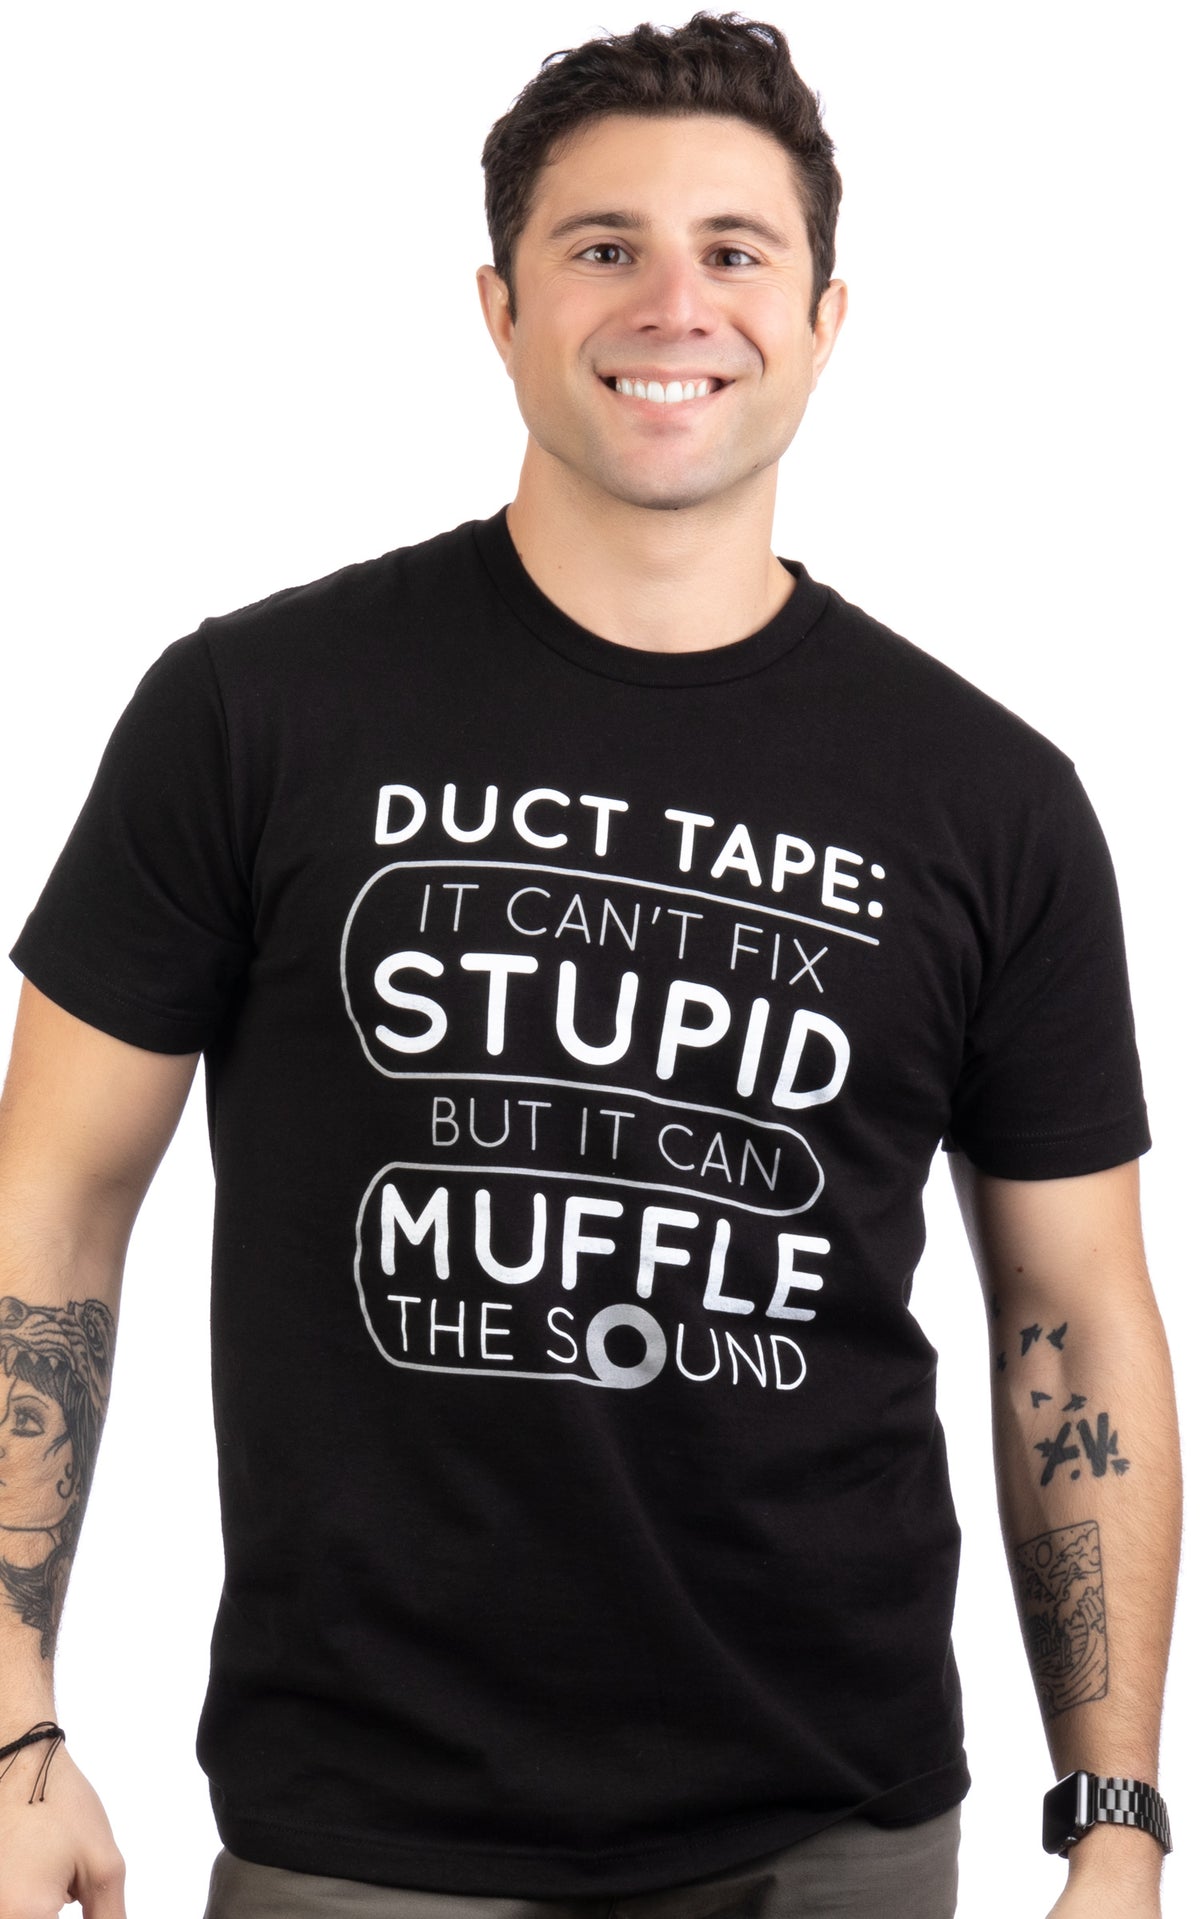 "Duct Tape Can't Fix Stupid, but can Muffle the Sound" - Funny T-shirt - Men's/Unisex